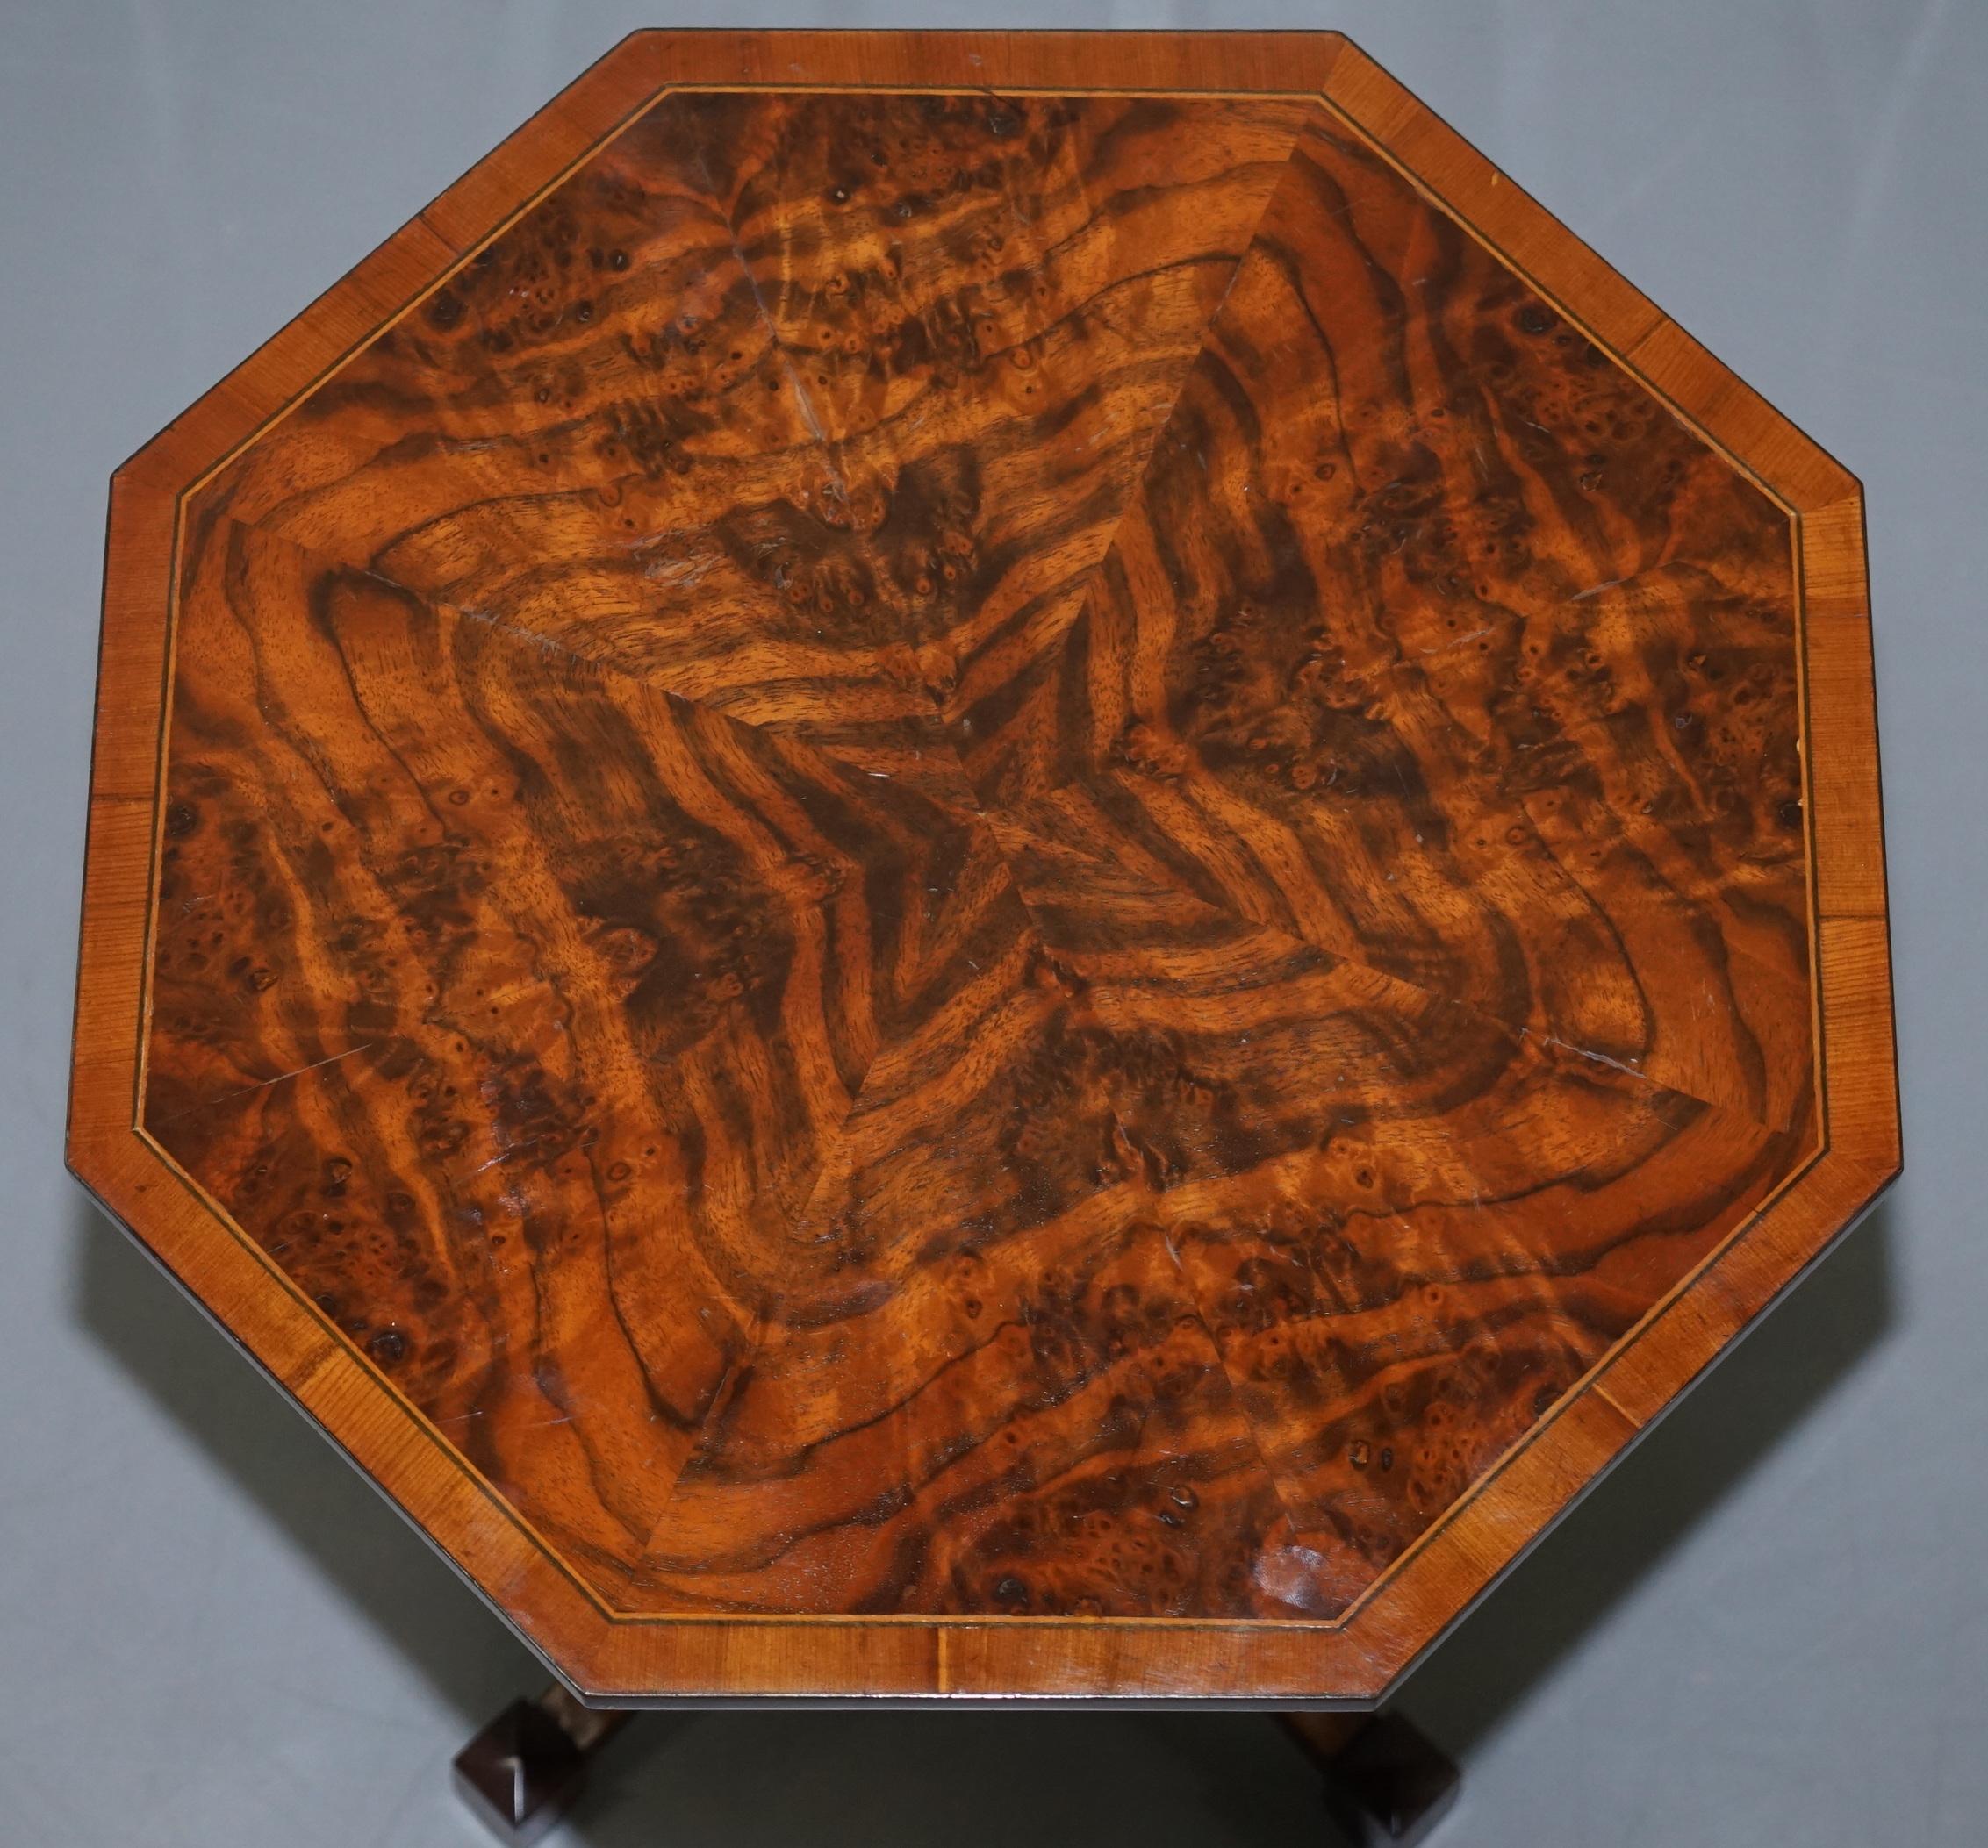 We are delighted to offer for sale this stunning late Victorian Burr Walnut octagonal side table on downs wept supports

A very good looking and decorative burr walnut table, I’ve not seen many of this type before, it has a very nice finish to the